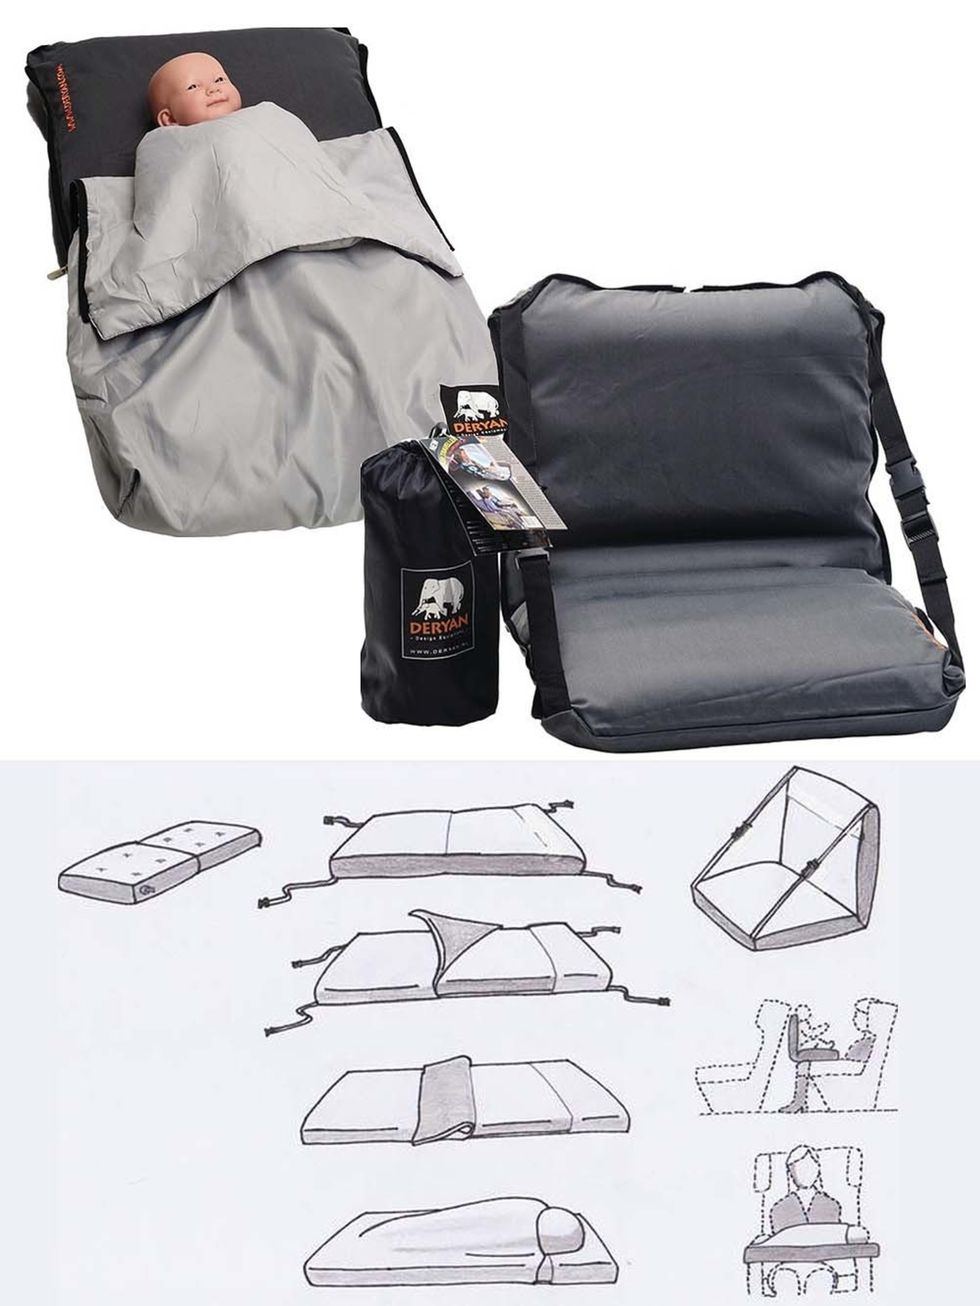 Product, Musical instrument accessory, Bag, Comfort, Luggage and bags, Baggage, Zipper, Strap, 